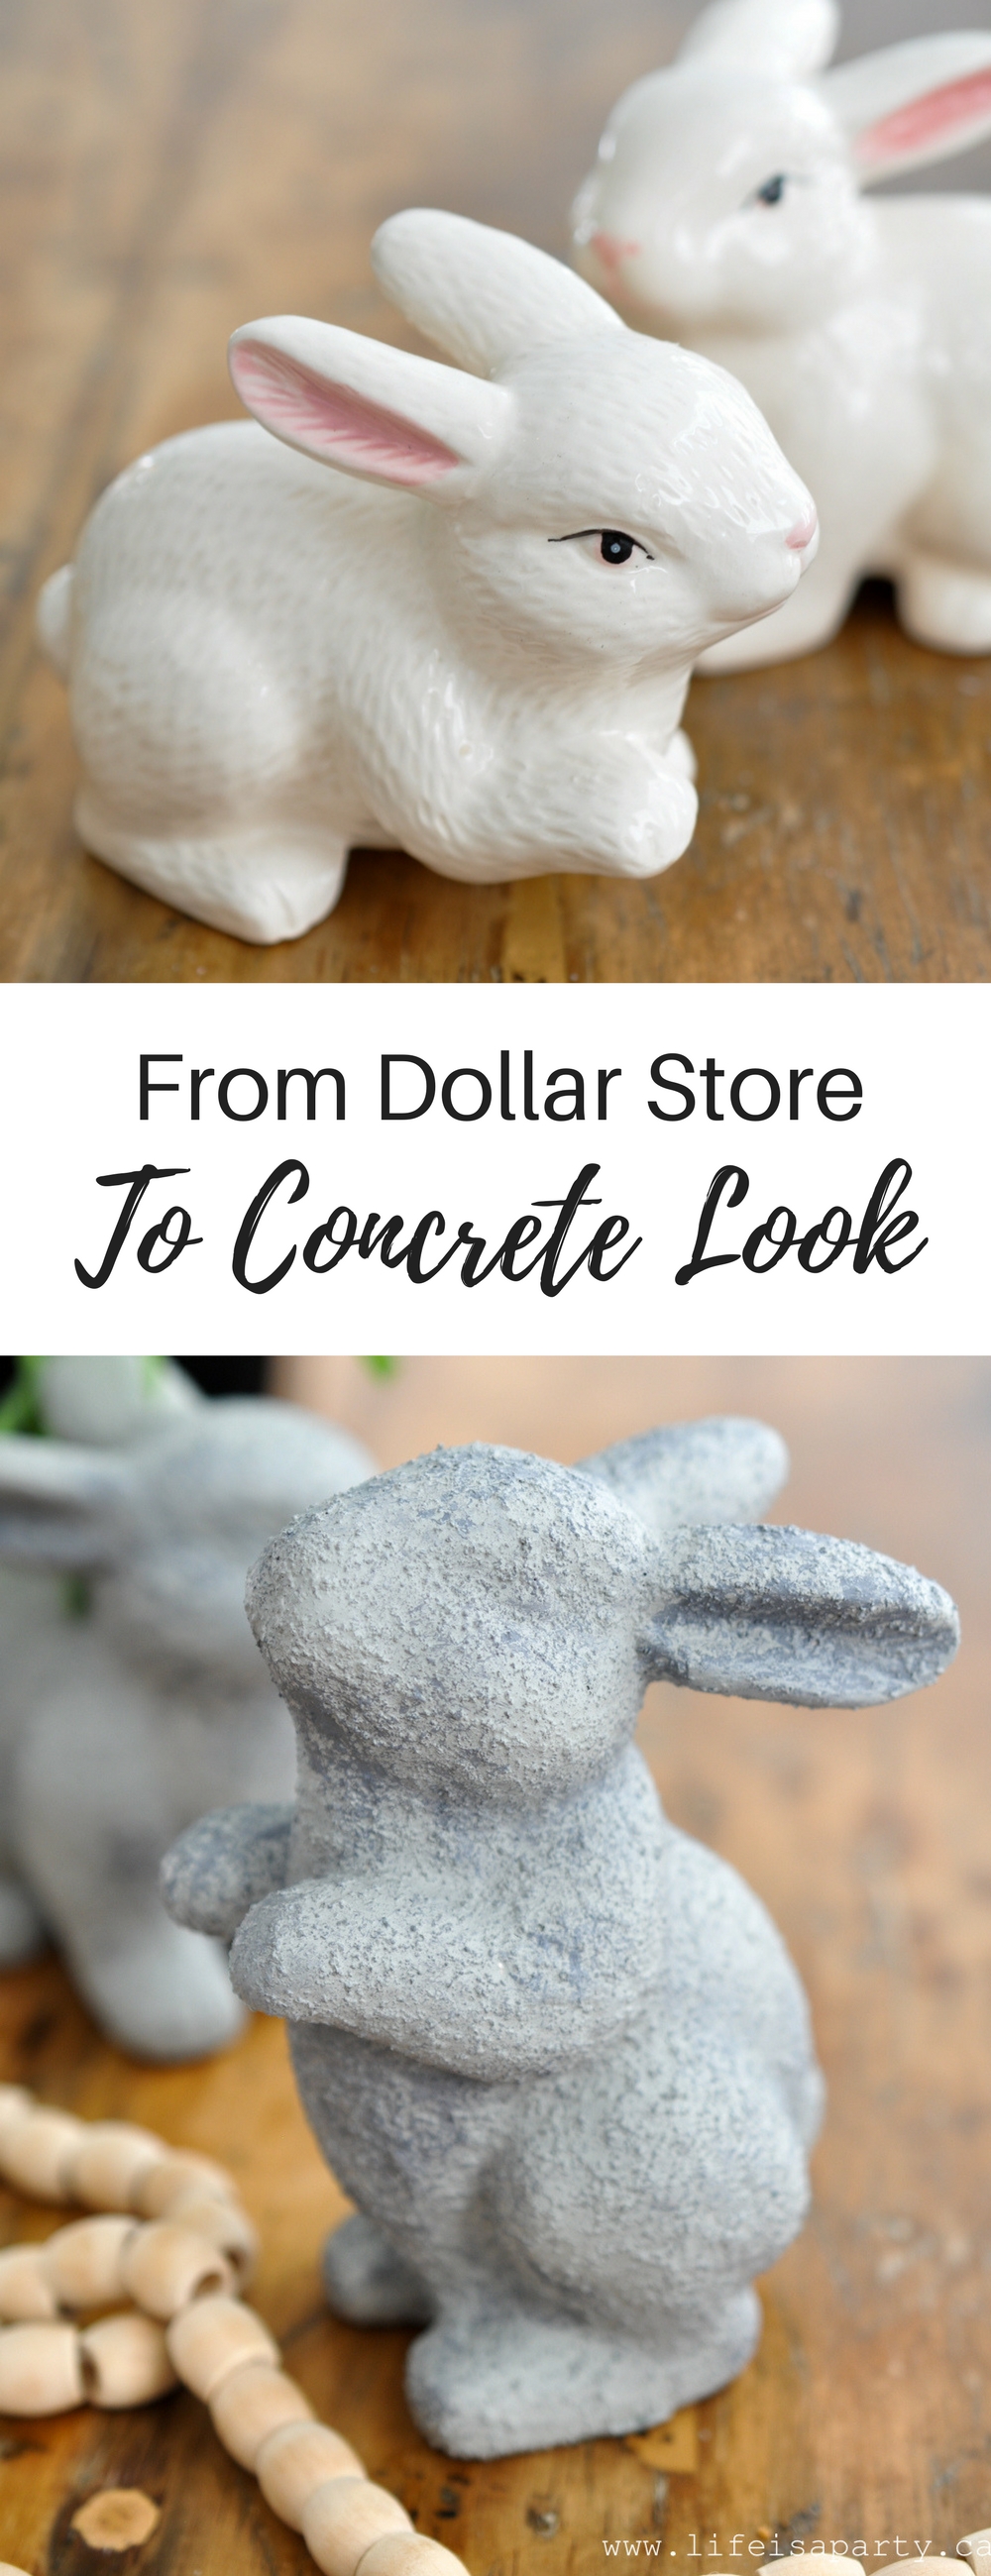 Faux Concrete Finish Bunnies: These dollar store bunnies get a concrete look easy makeover and now look like expensive garden concrete bunnies.